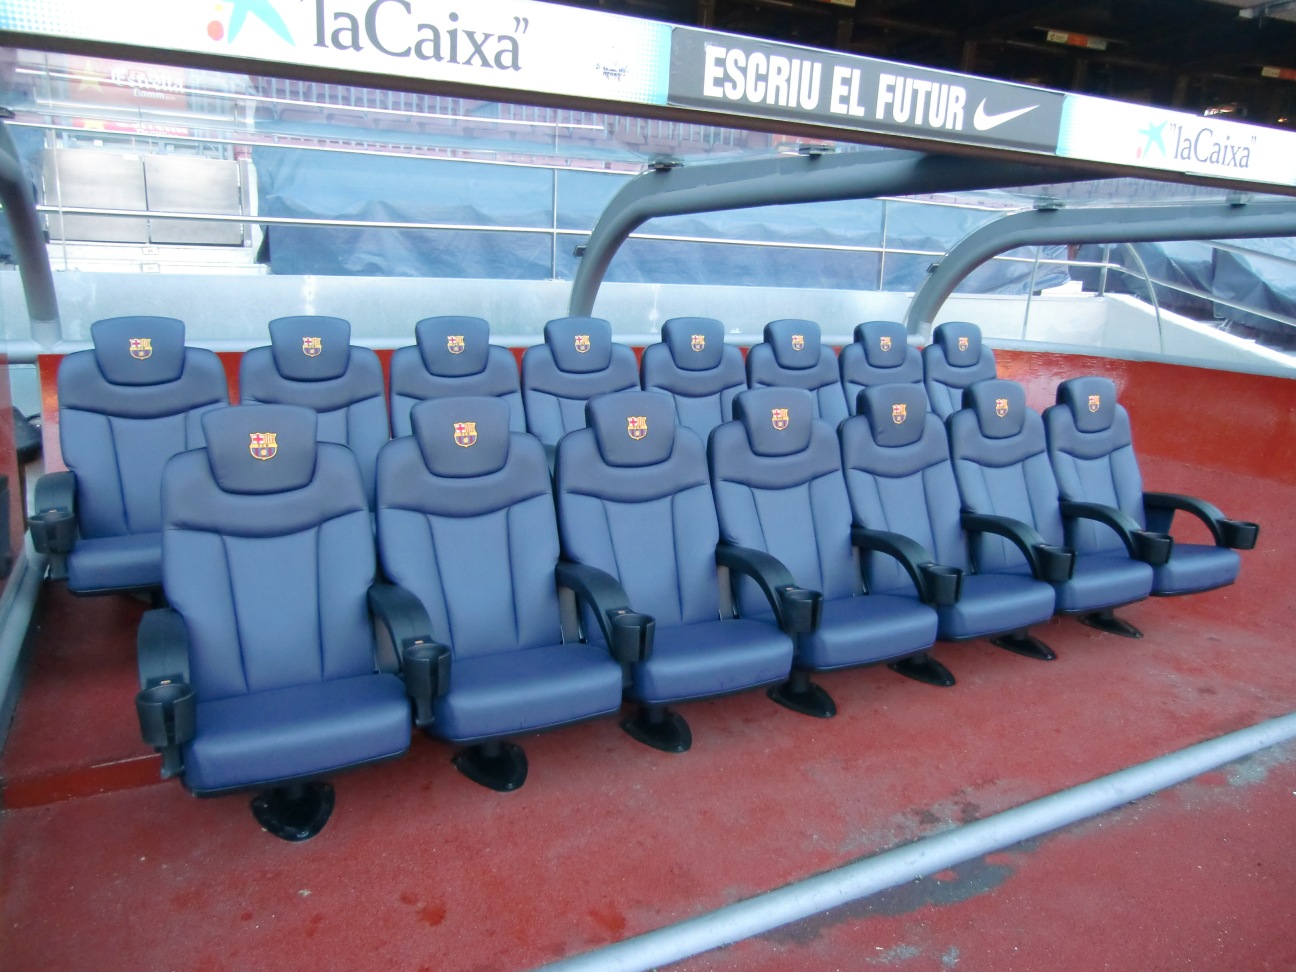 The soccer players chairs